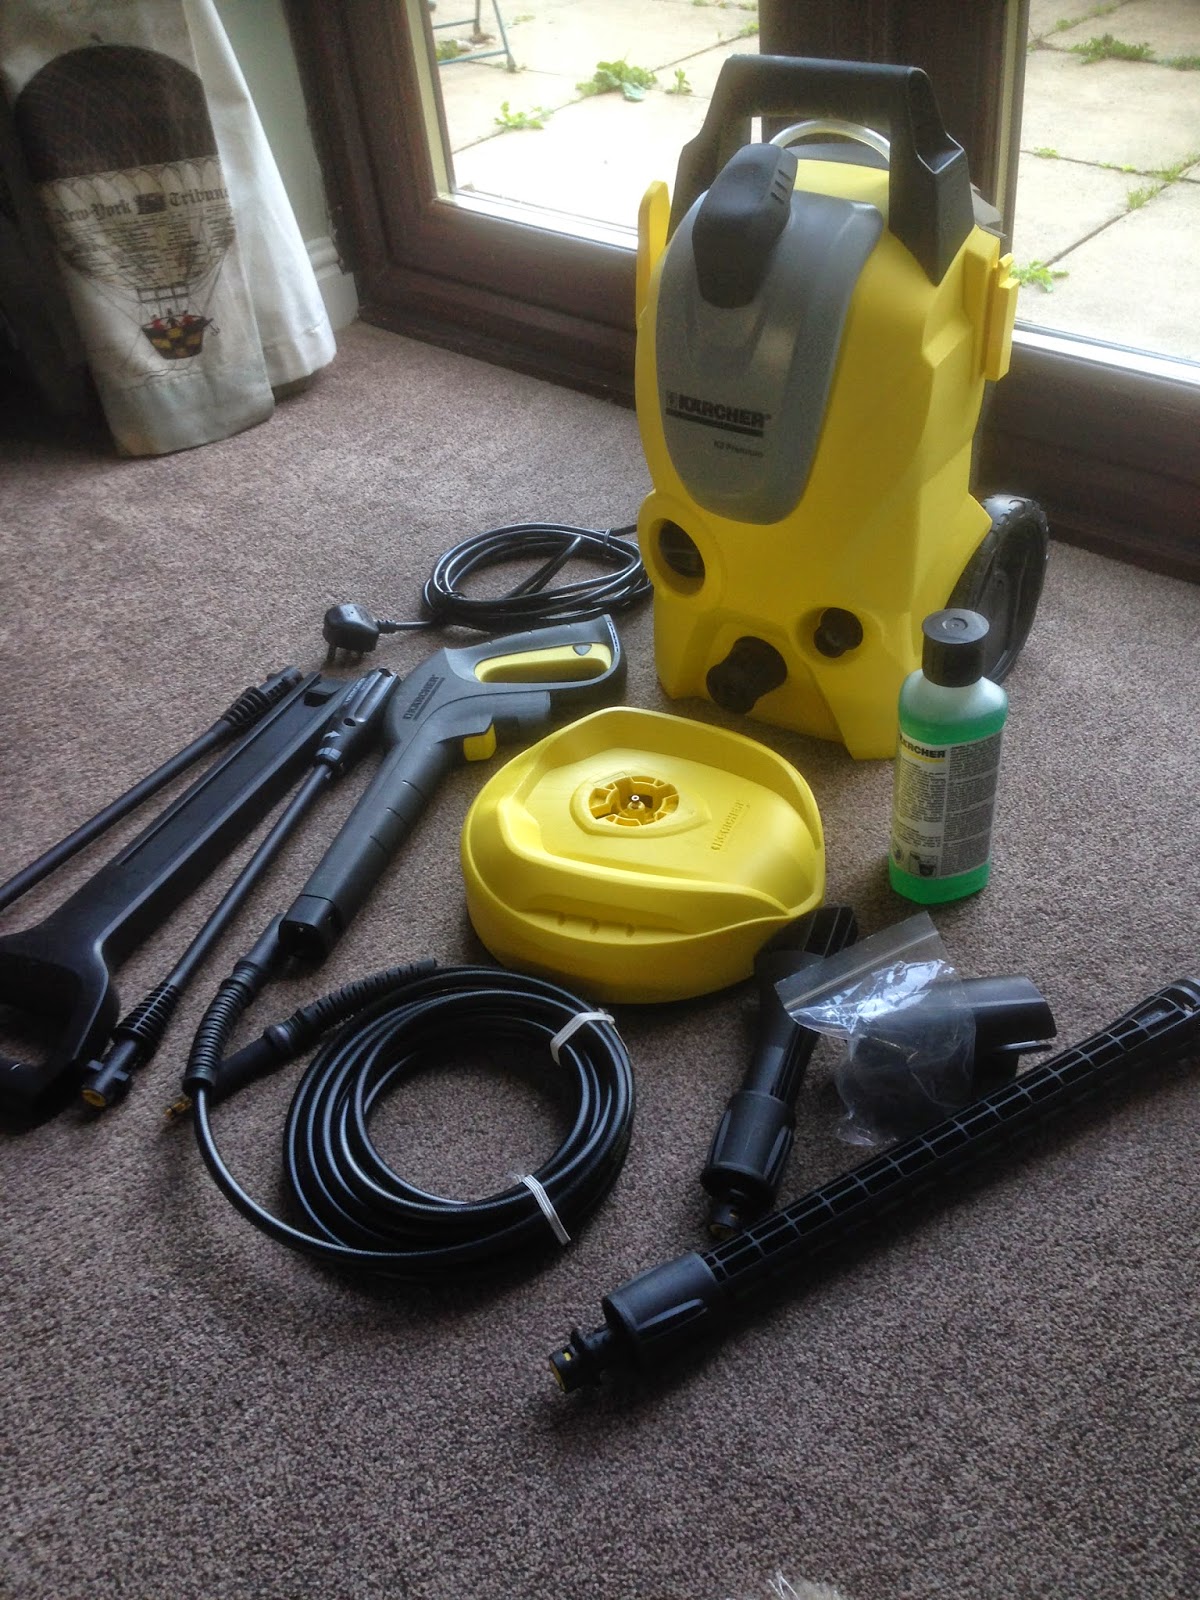 My Karcher K3 Car & Home Pressure Washer Review The